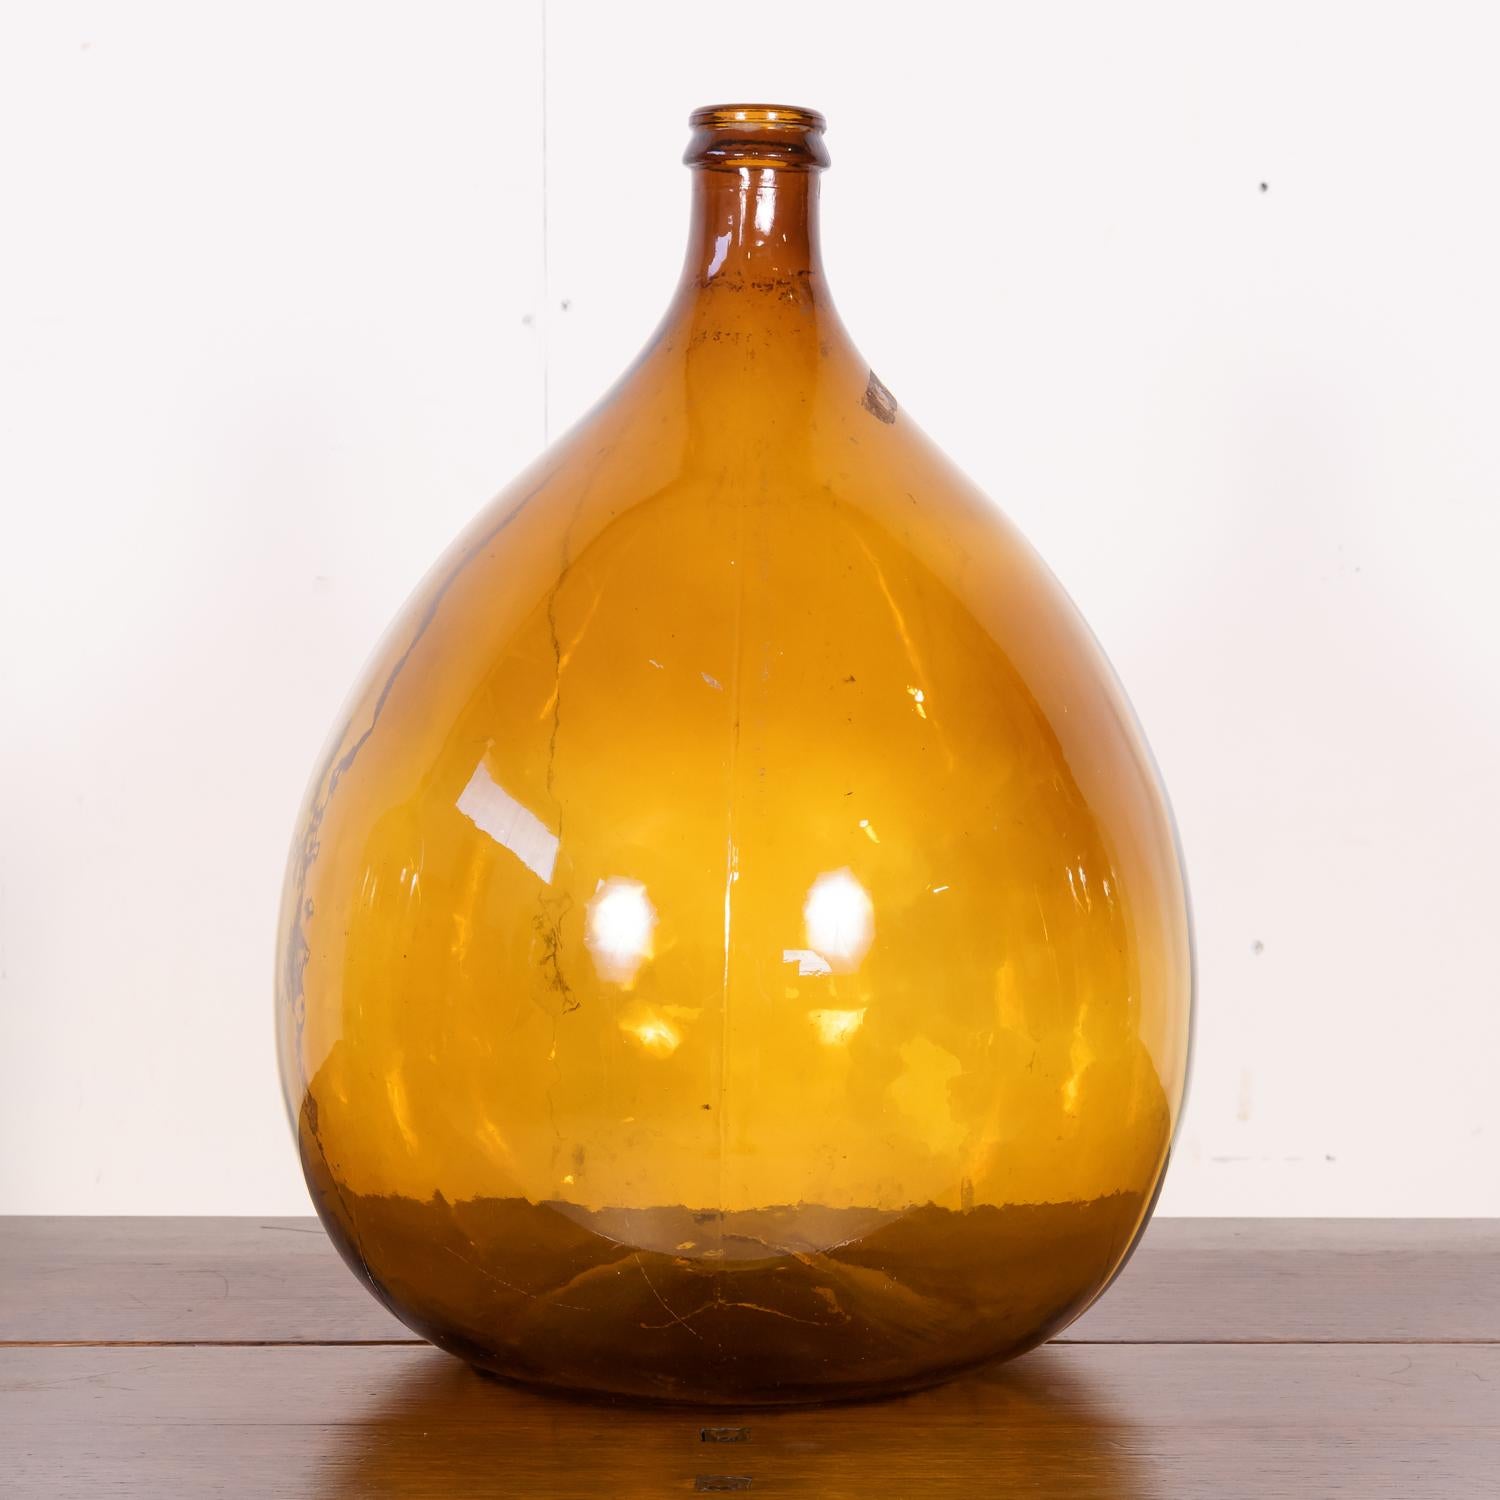 A large 19th century French hand blown glass demijohn or Dame Jeanne bottle, circa 1890s. This beautifully bulbous shaped and bright amber colored glass bottle has visible bubbles and no seams, indicating it was hand blown rather than made with a